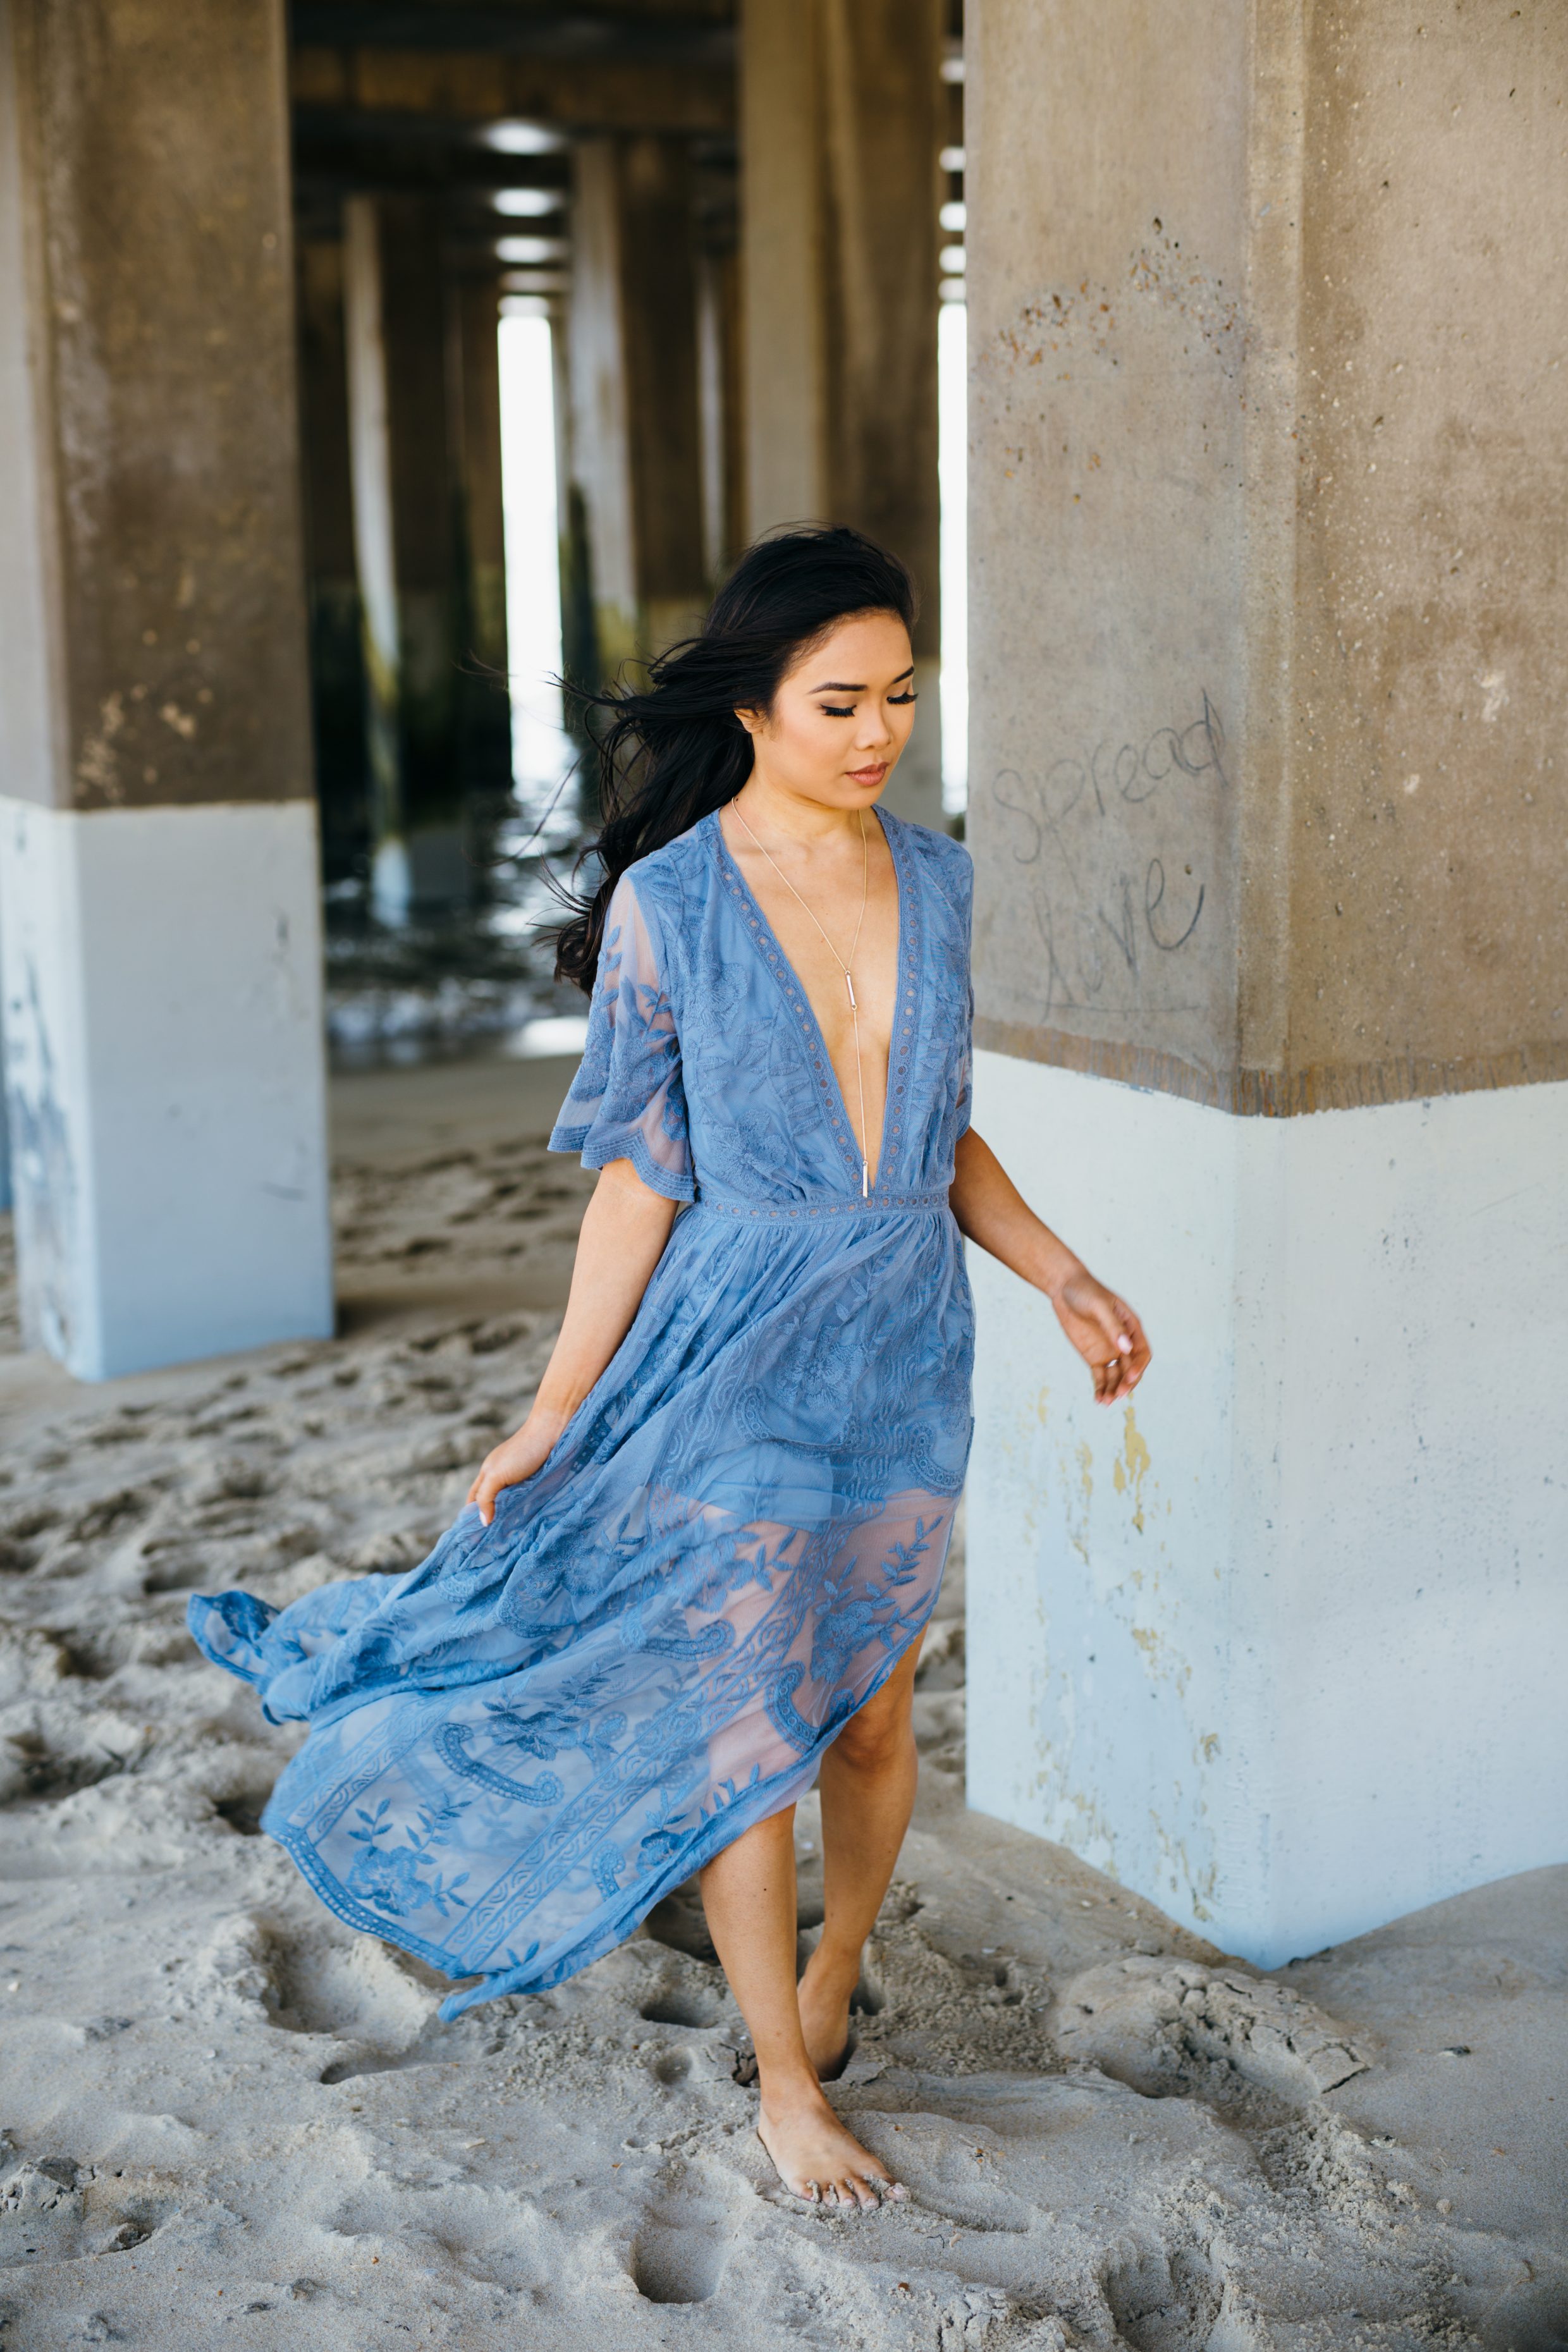 Dusty Blue Lace :: Overlay Lace Romper - Color & Chic